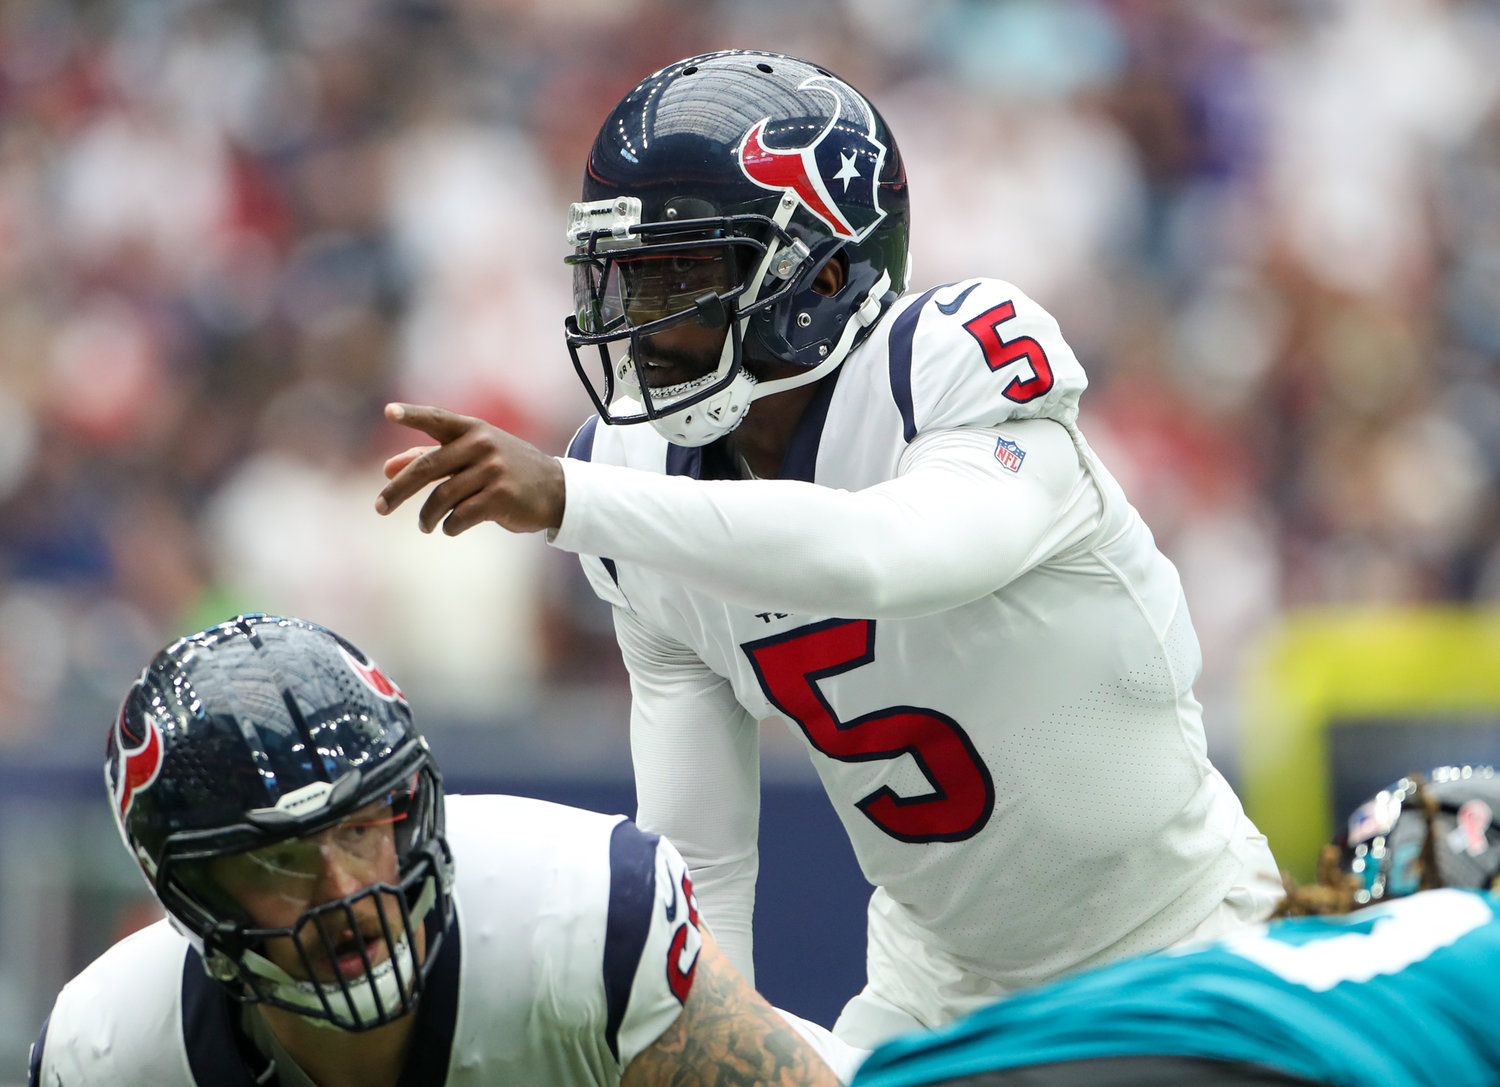 Houston Texans quarterback Tyrod Taylor (5) gestures before a snap during the first half of an NFL game between the Houston Texans and the Jacksonville Jaguars on September 12, 2021 in Houston, Texas.